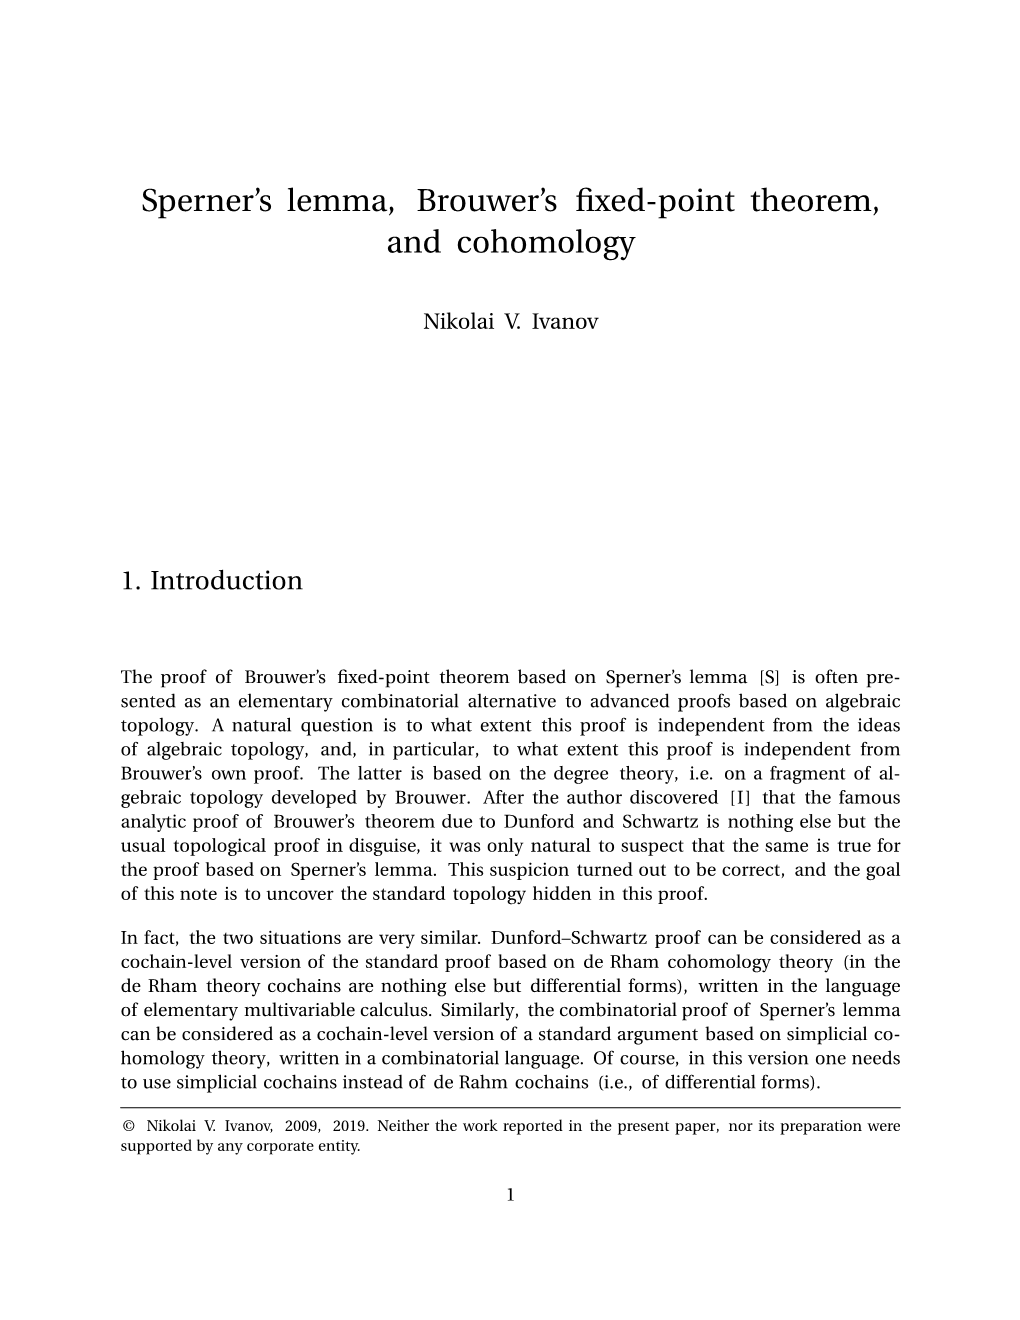 Sperner's Lemma, Brouwer's Fixed-Point Theorem, and Cohomology